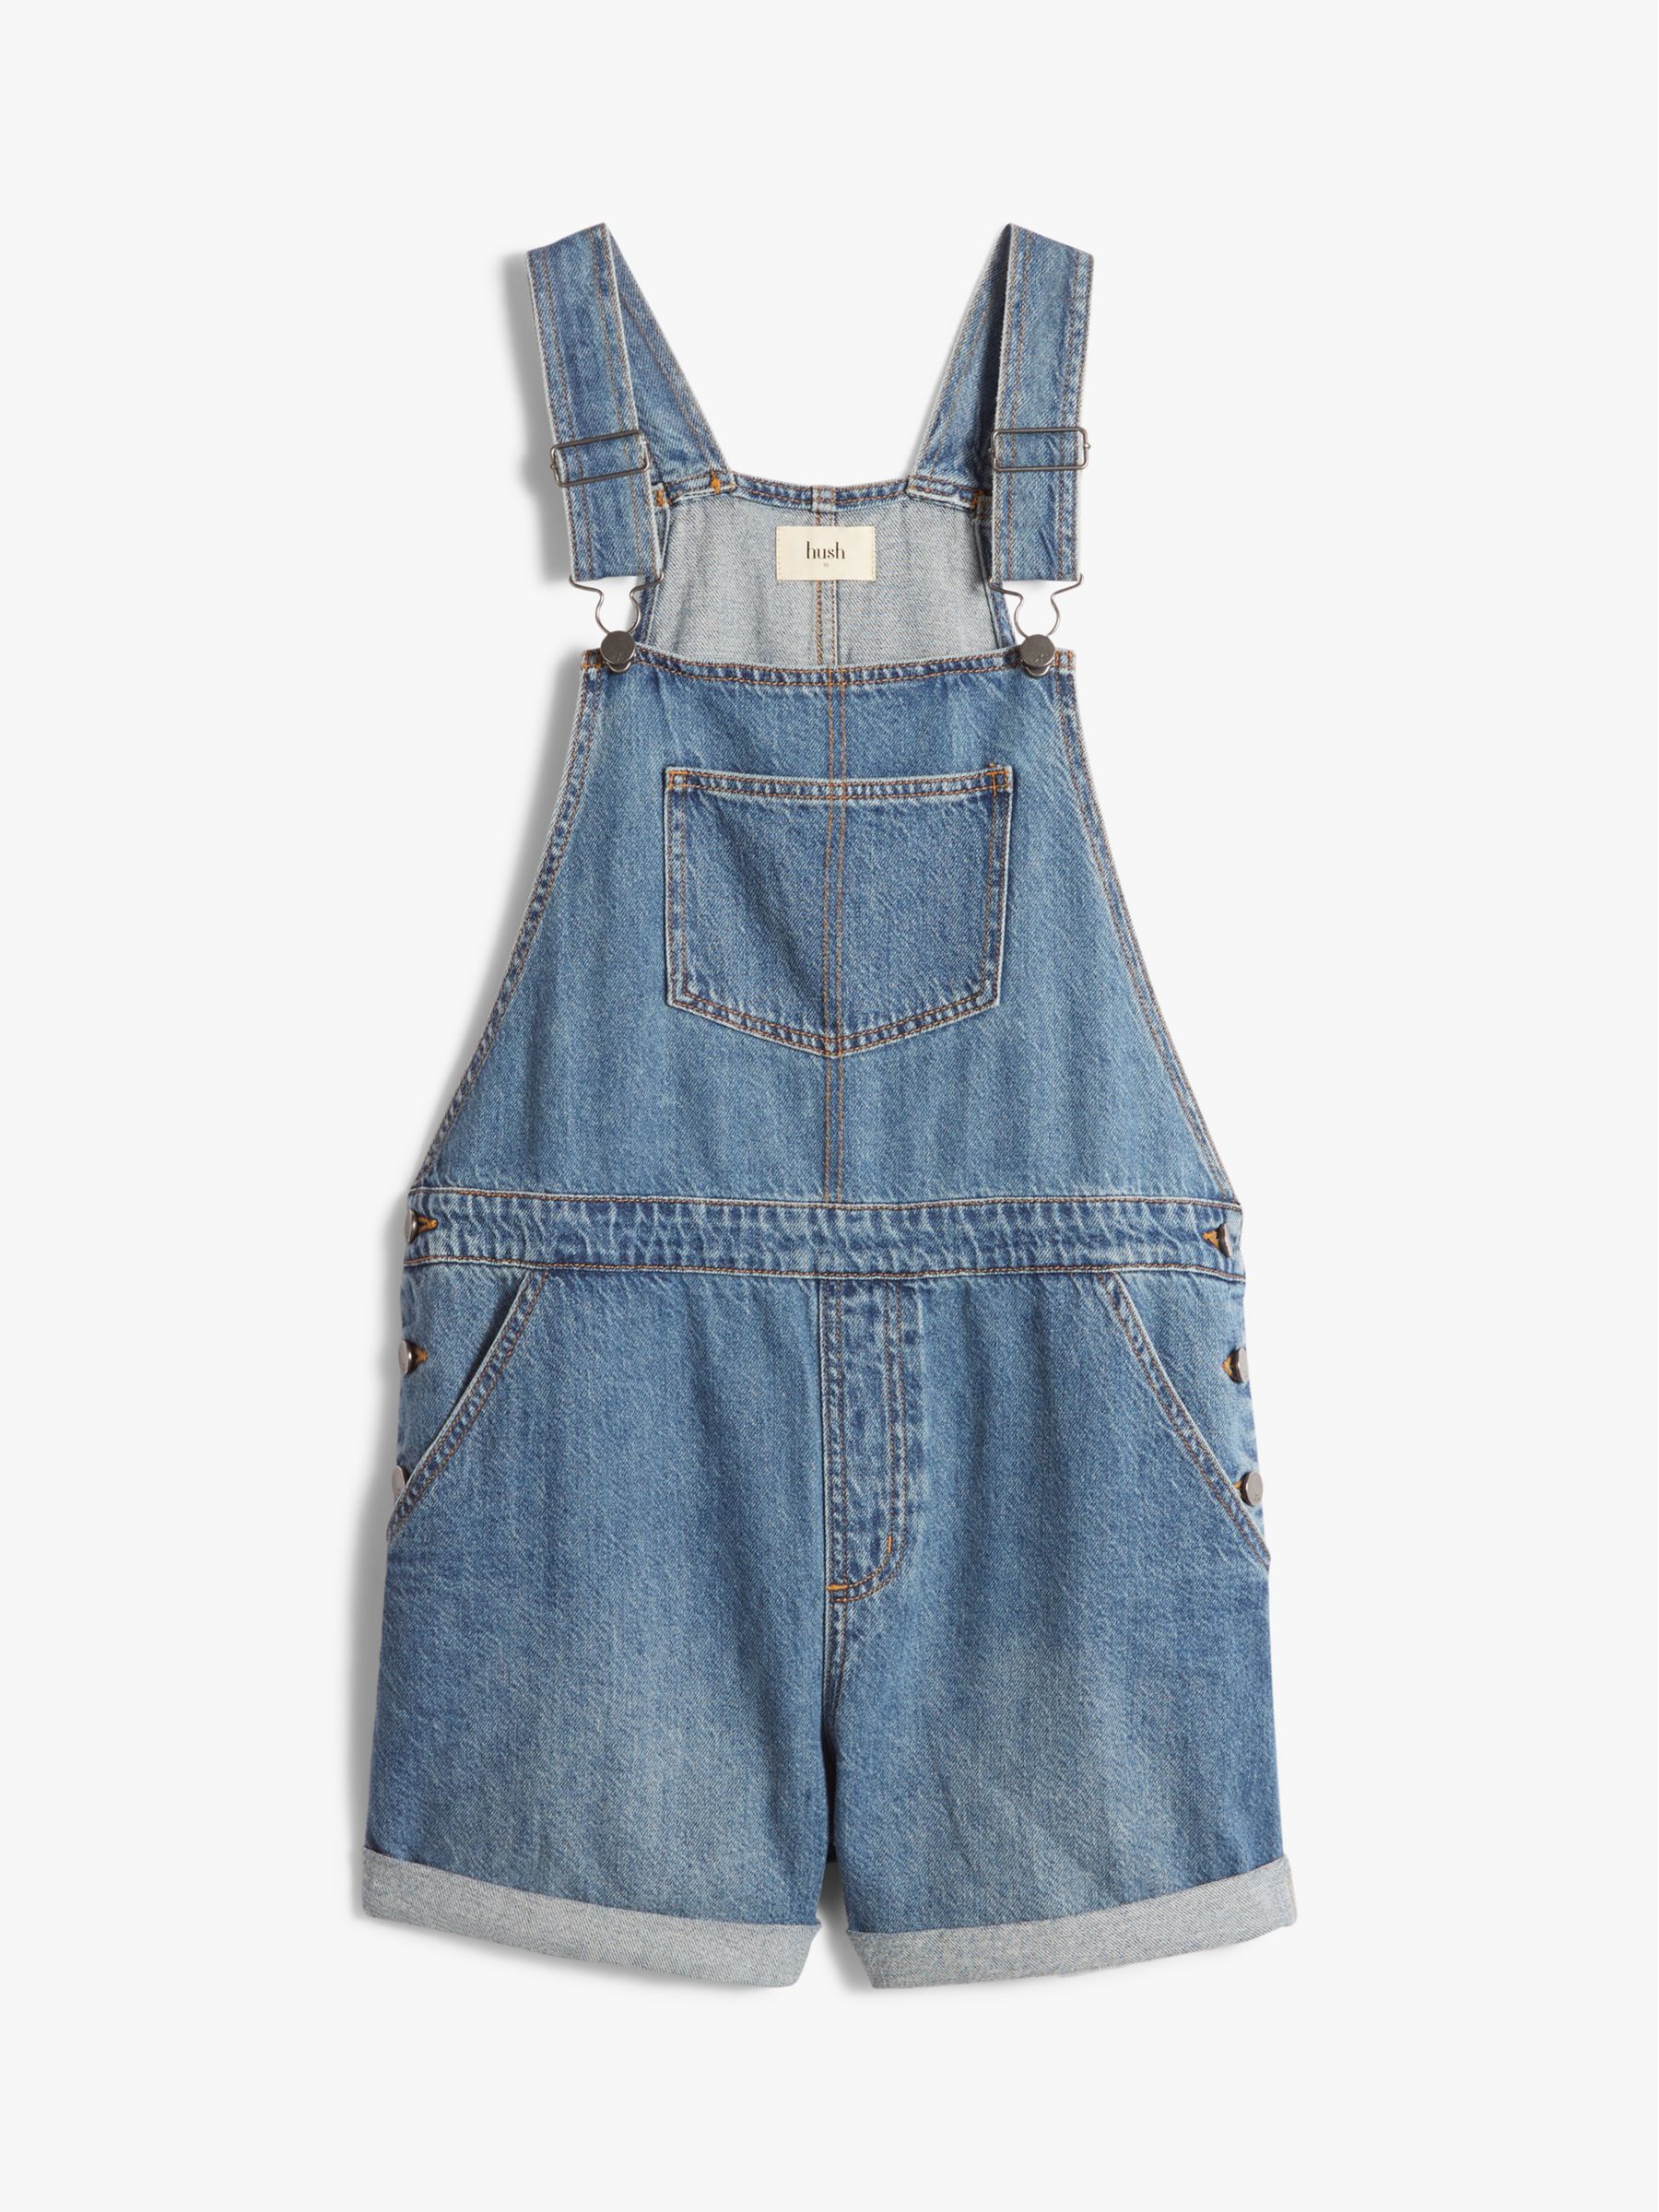 HUSH Jasmine Relaxed Short Dungarees, Light Authentic Blue